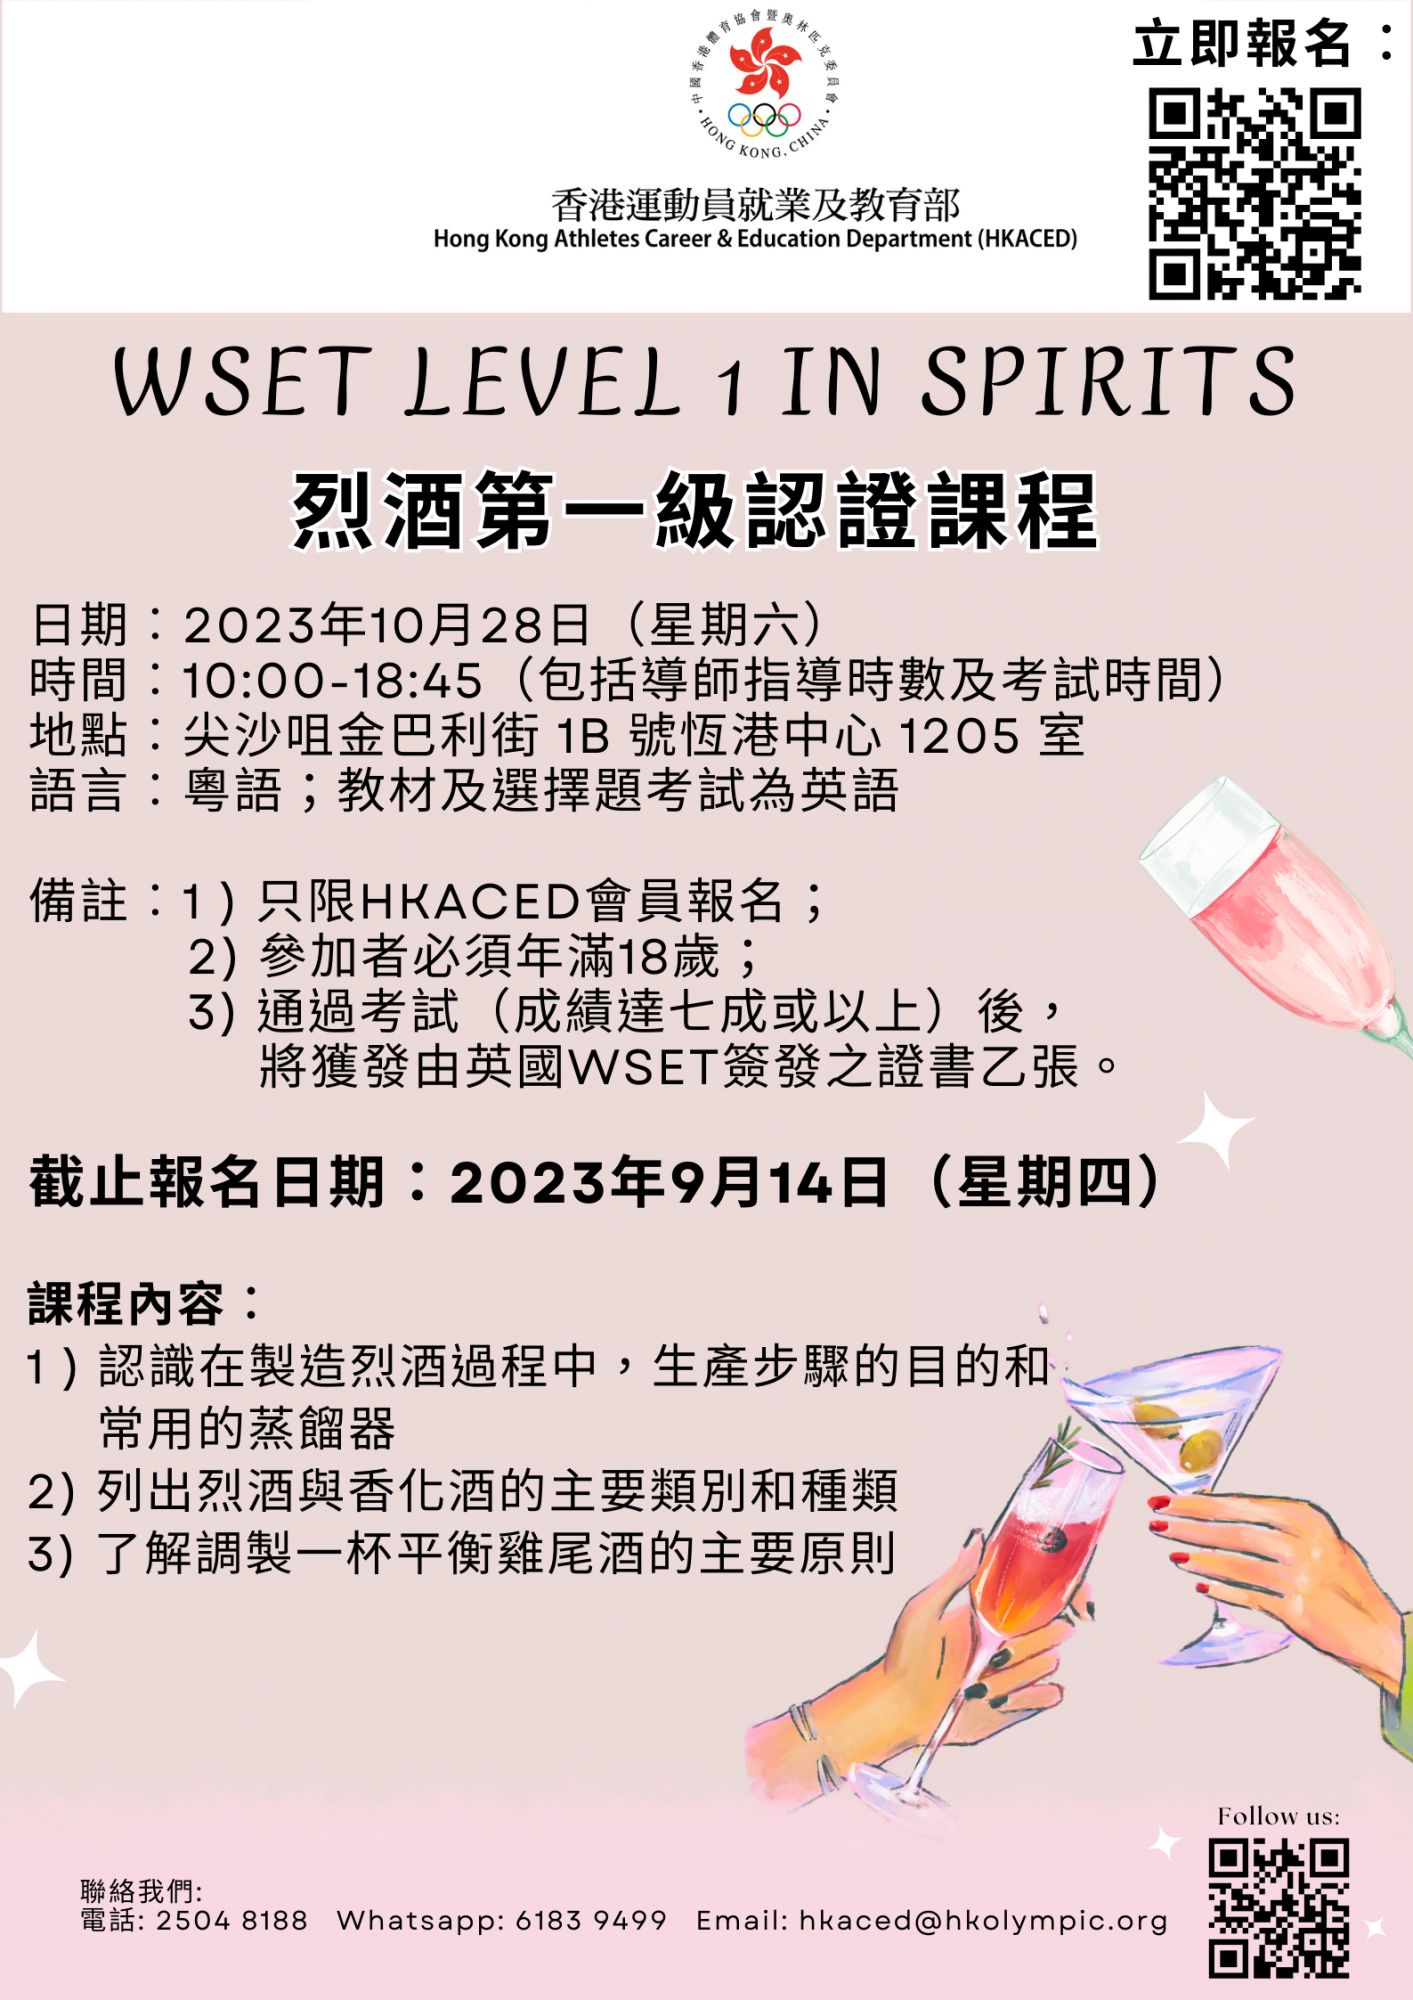 WSET Level 1 in Spirits Poster.png